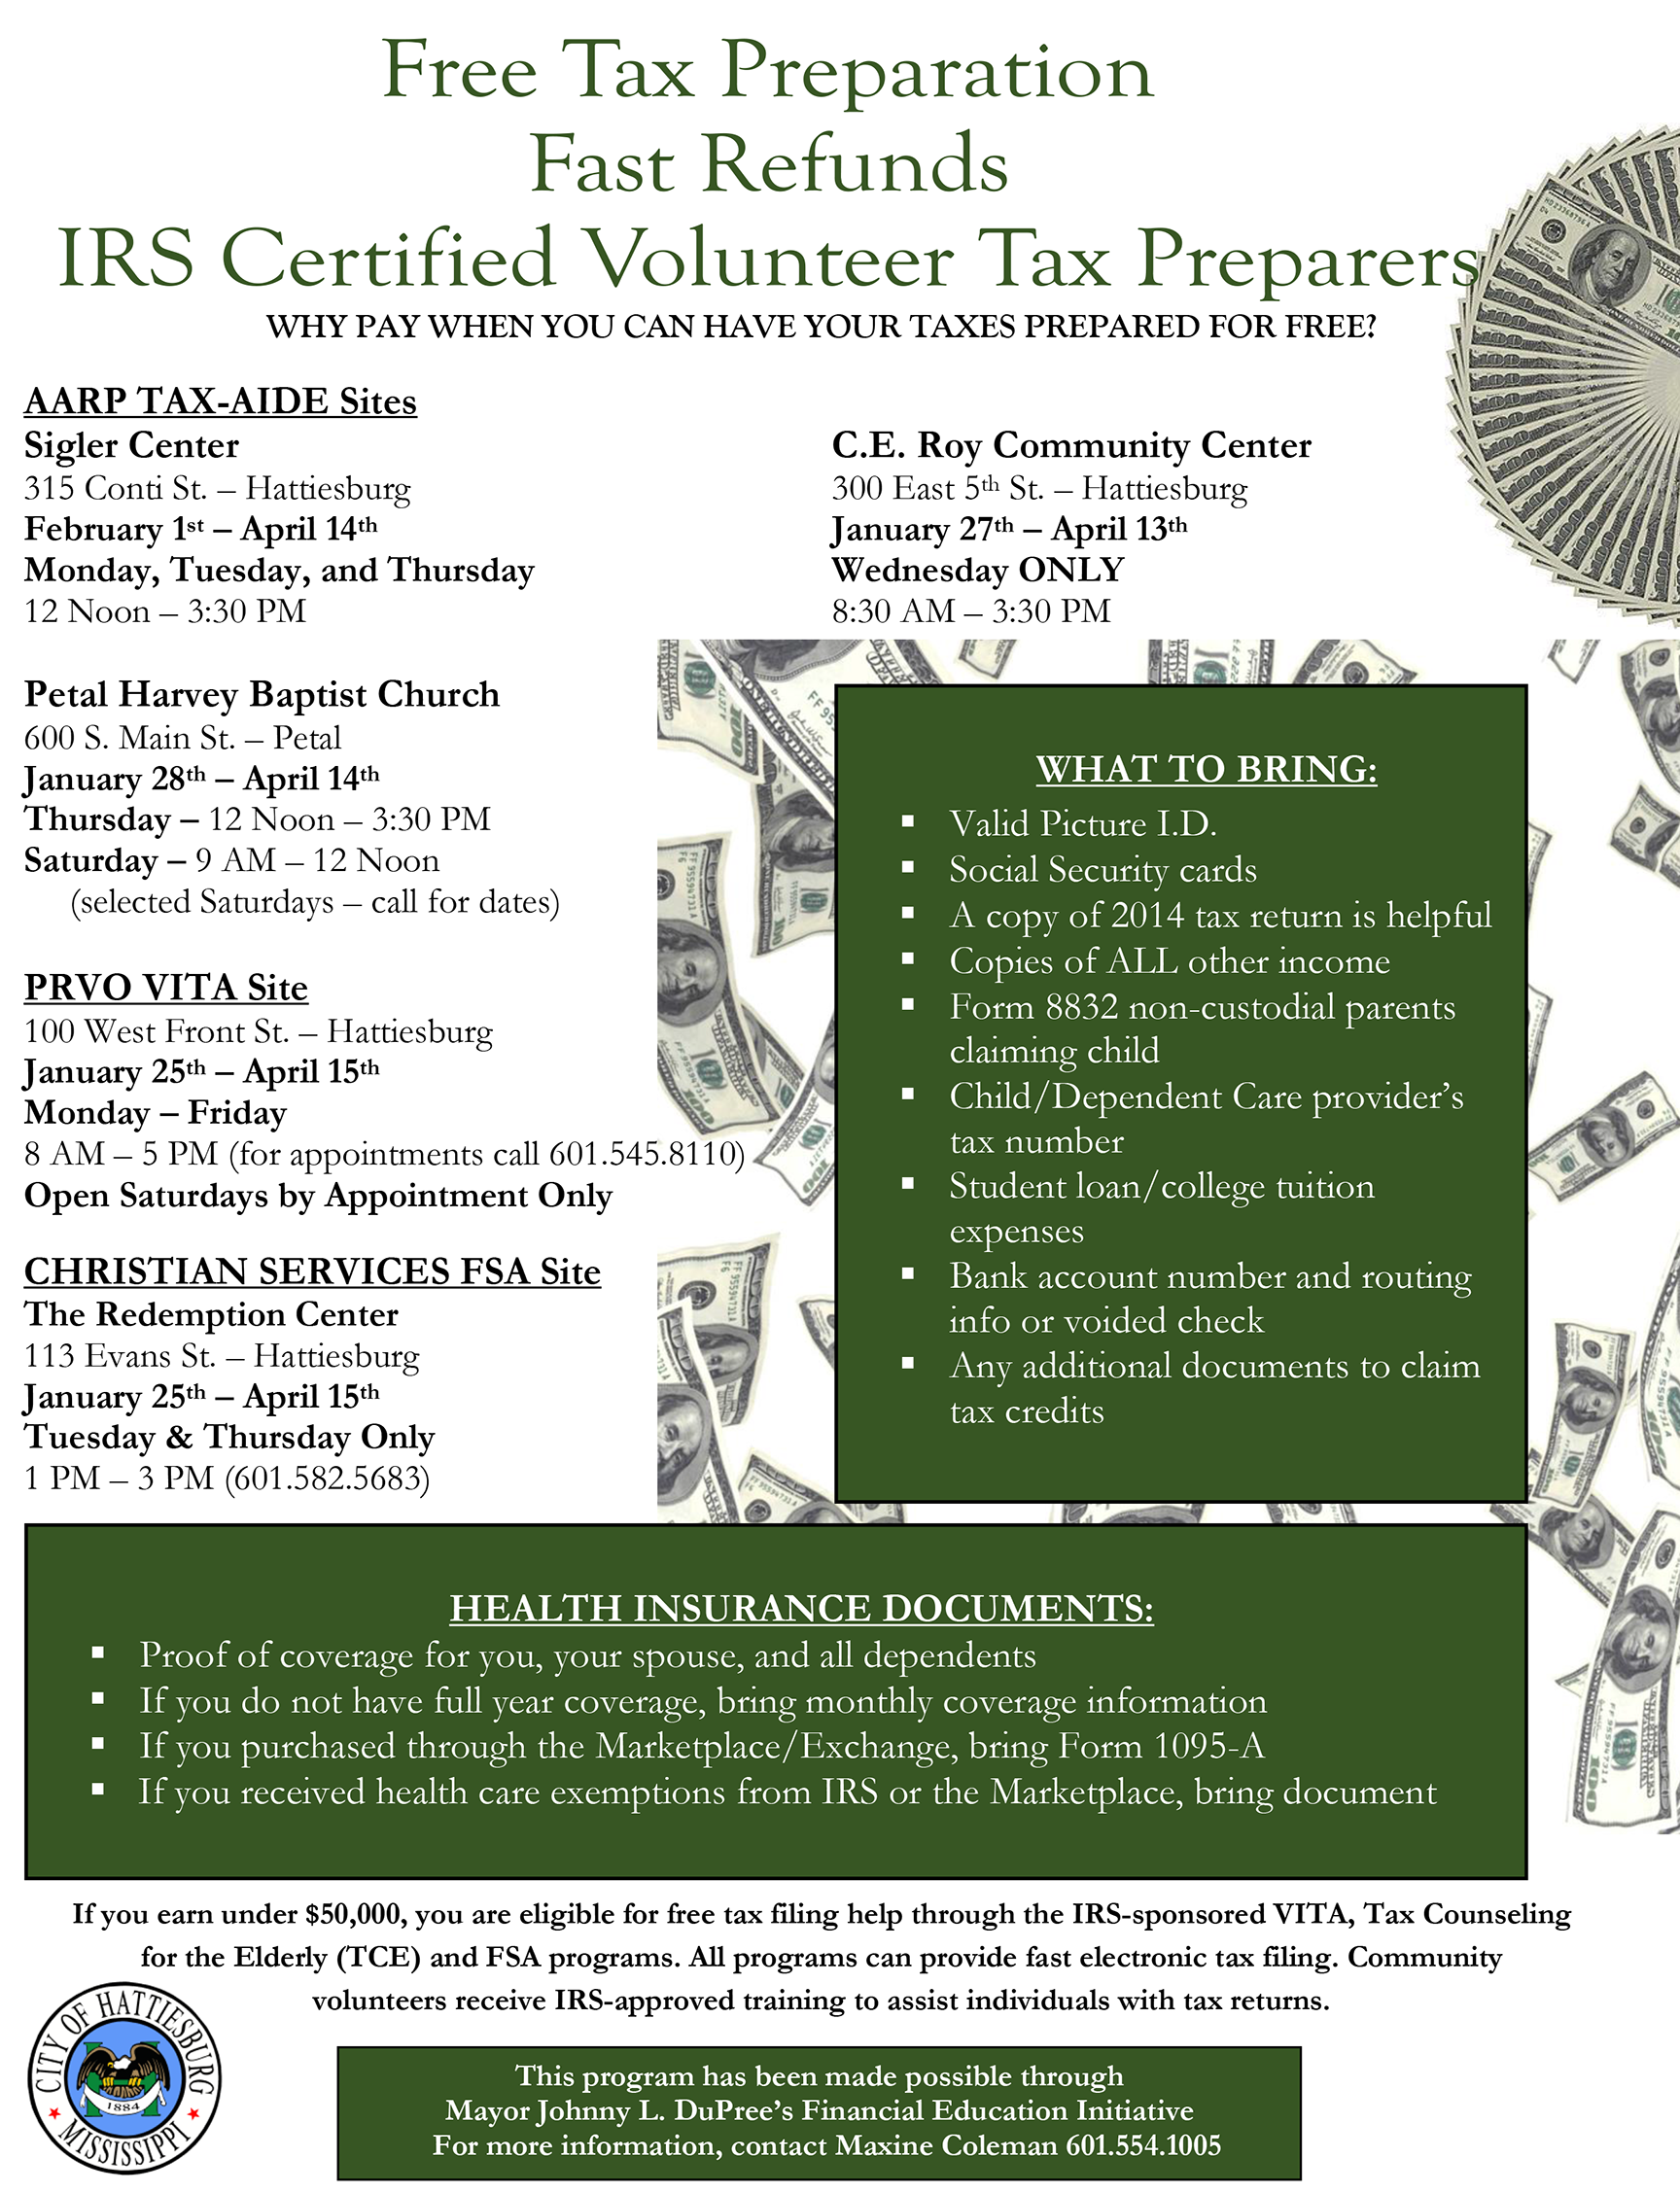 2016-FREE-TAX-ASSISTANCE-Flyer-Location-3